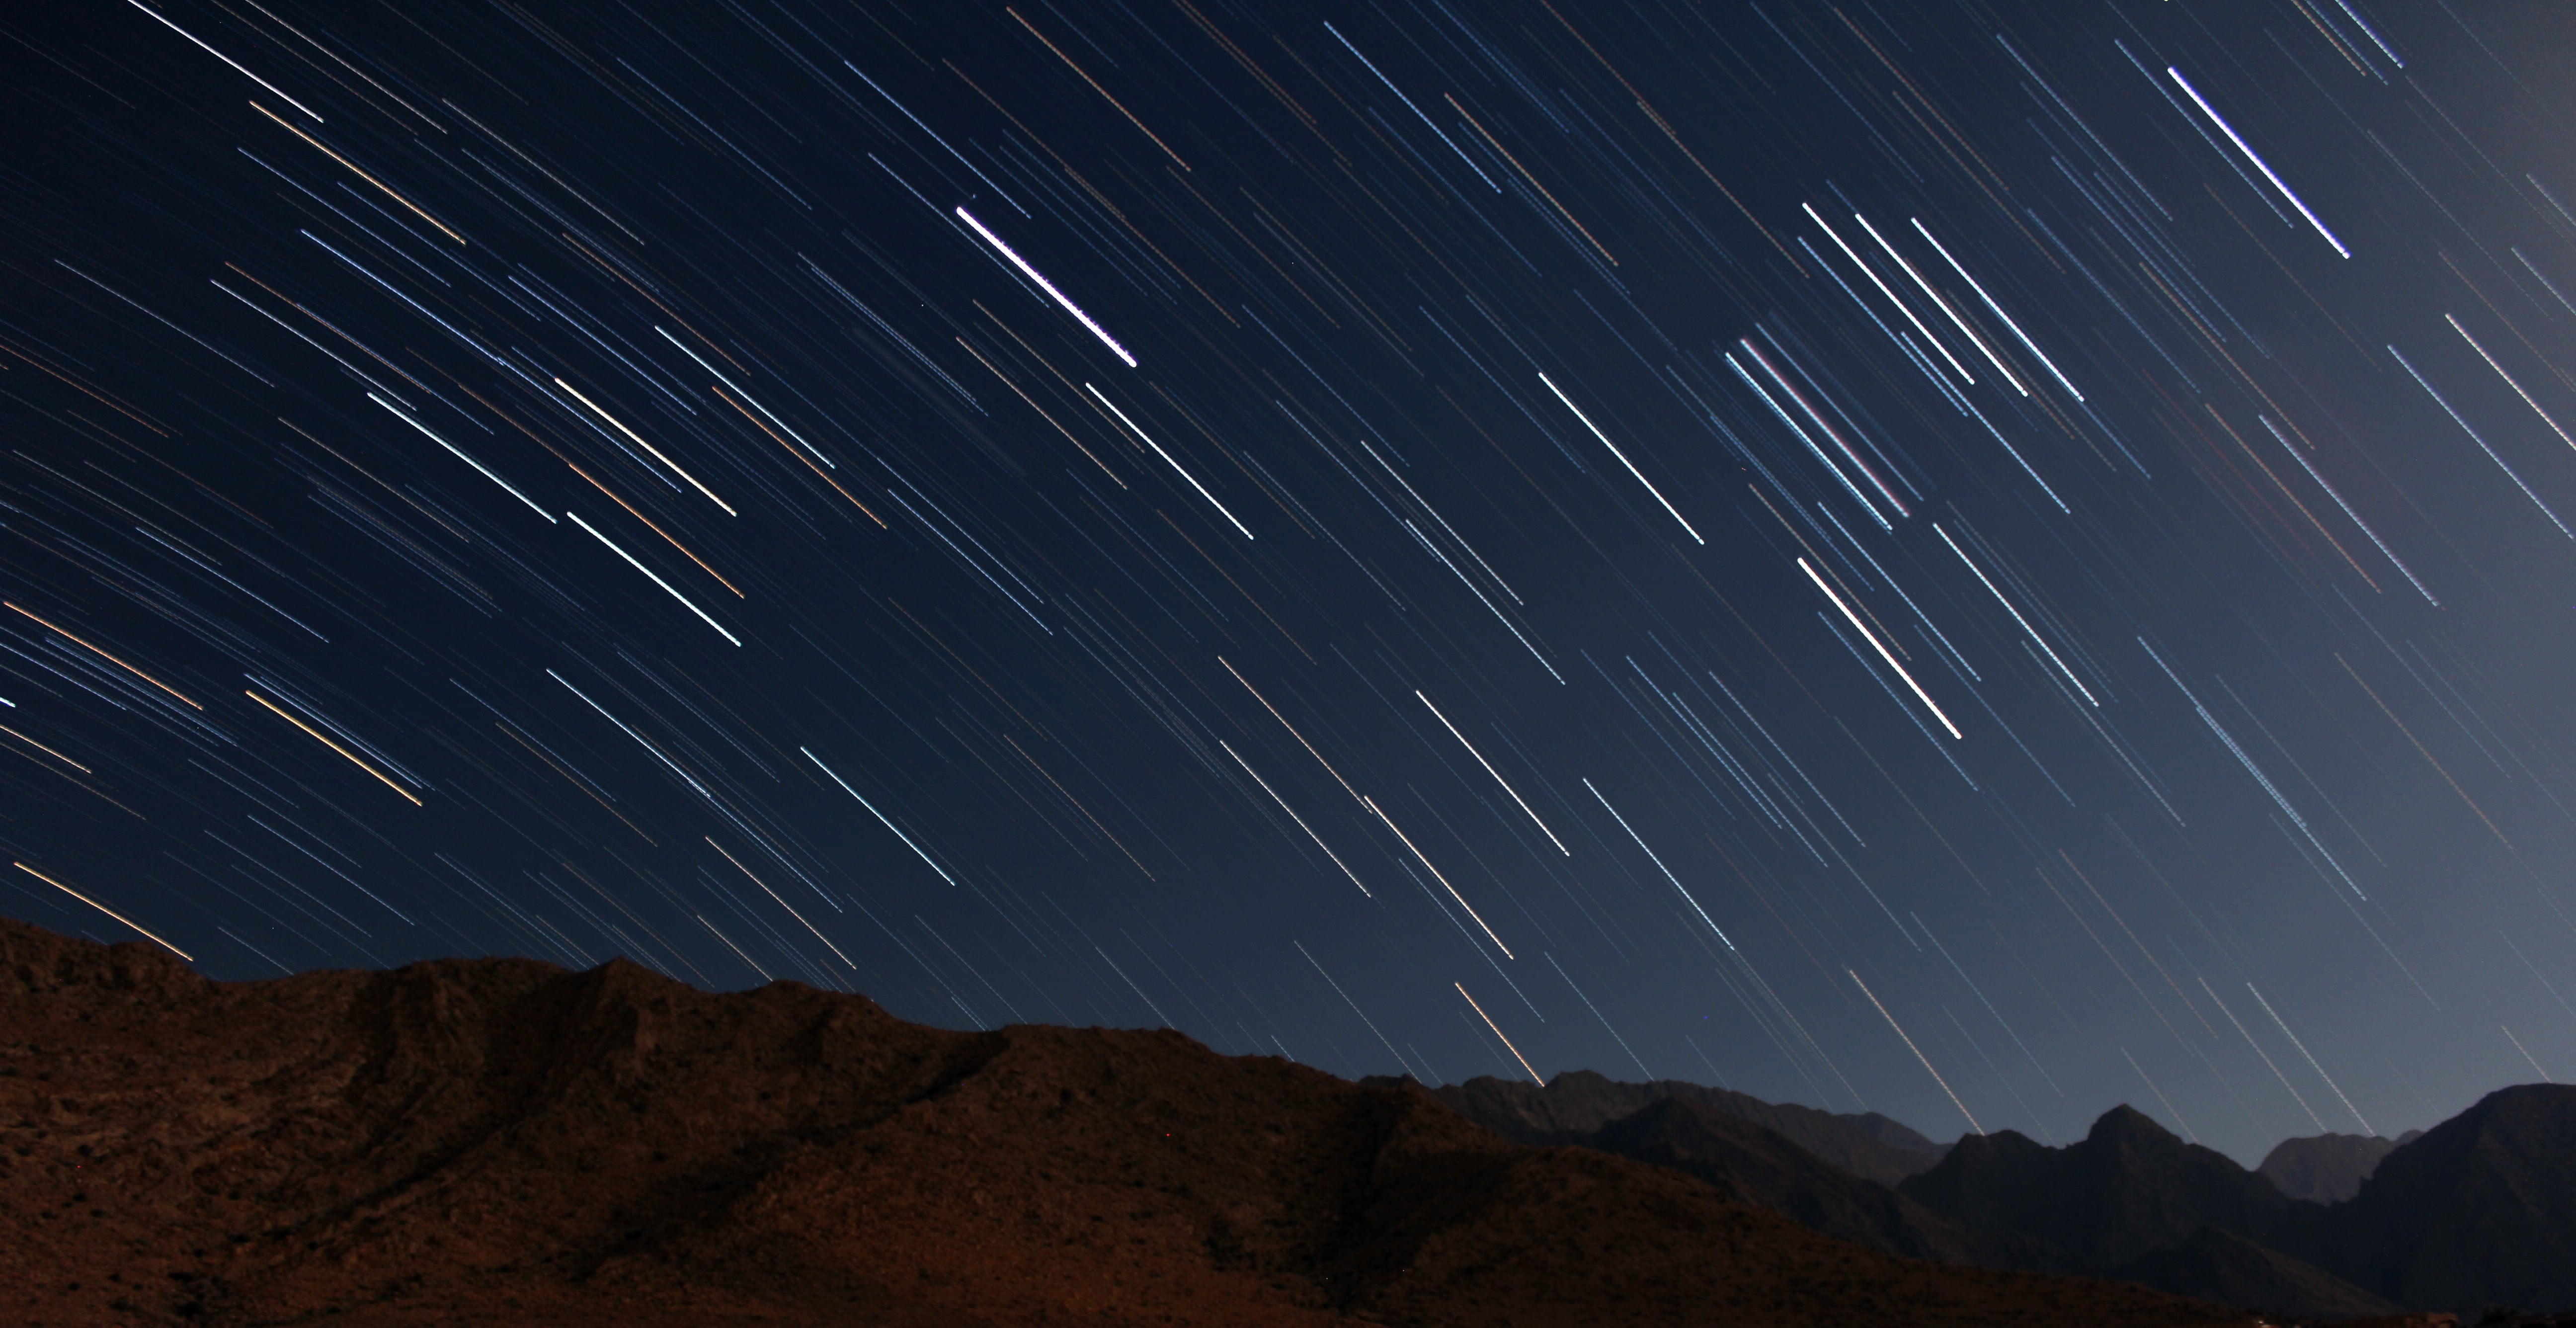 star shower, mountains, sky, stars, long exposure, star - space